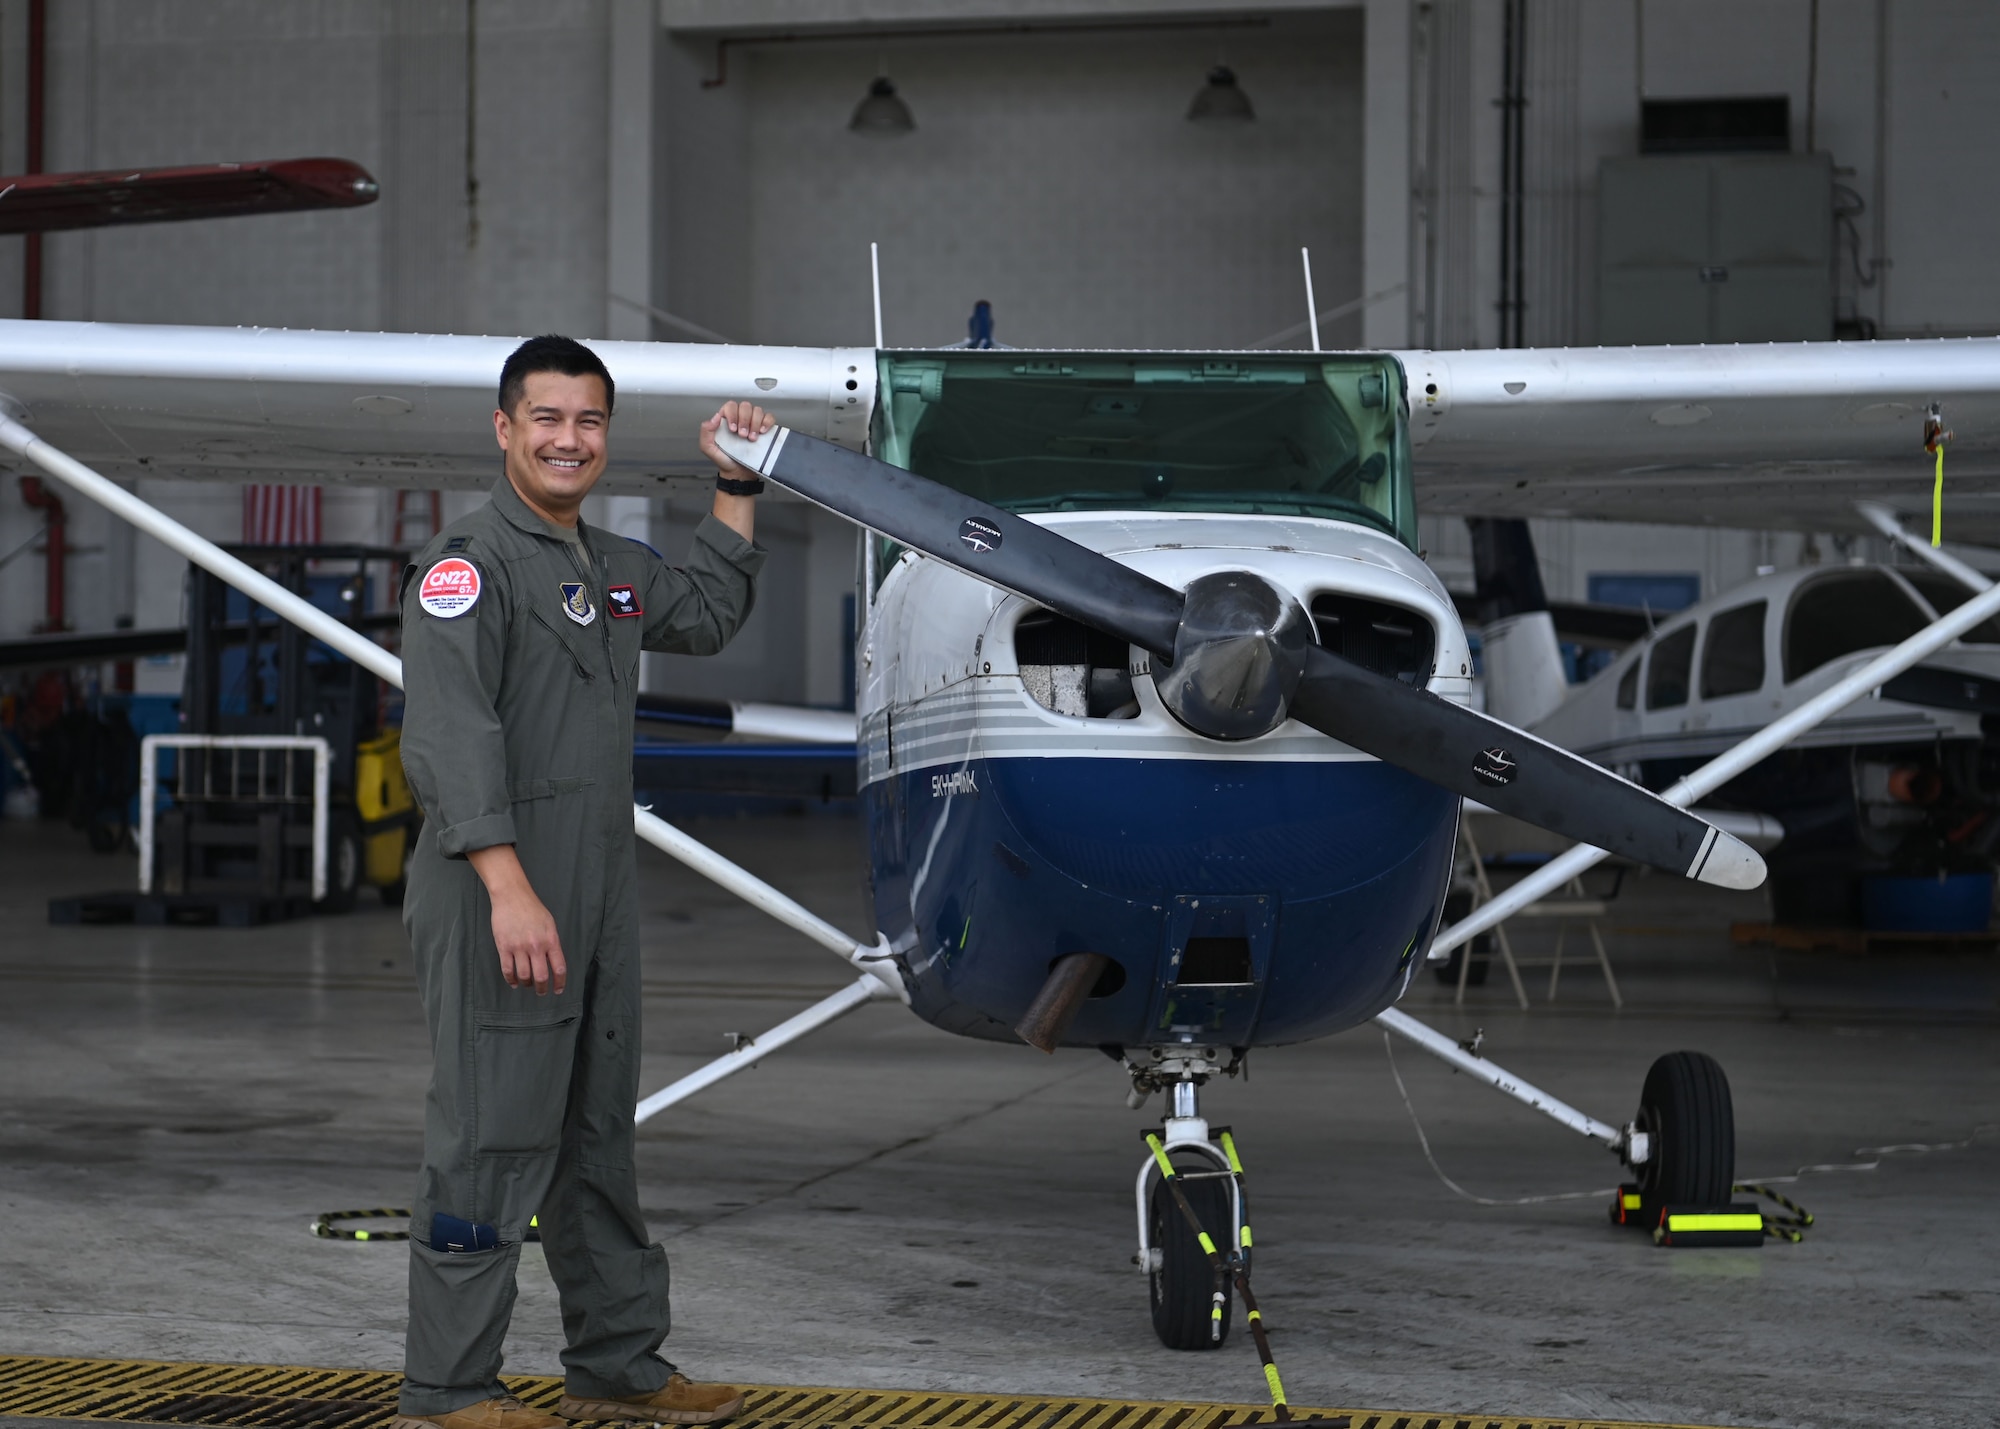 U.S. Air Force Capt. Celestino Aguon, also known as “Torch”, an F-15C Eagle pilot with the 67th Fighter Squadron assigned to Kadena Air Base, Japan, takes a photo next to the first aircraft he flew prior to joining the military at Antonio B. Won Pat International Airport, Guam, Feb. 23, 2022. Aguon returned to his home to participate in Exercise Cope North 2022, which is a multilateral U.S. Pacific Air Forces-sponsored field training exercise that is conducted annually at Andersen Air Force Base, Guam, that occurred from Feb. 2-18, 2022. (U.S. Air Force photo by Staff Sgt. Aubree Owens)